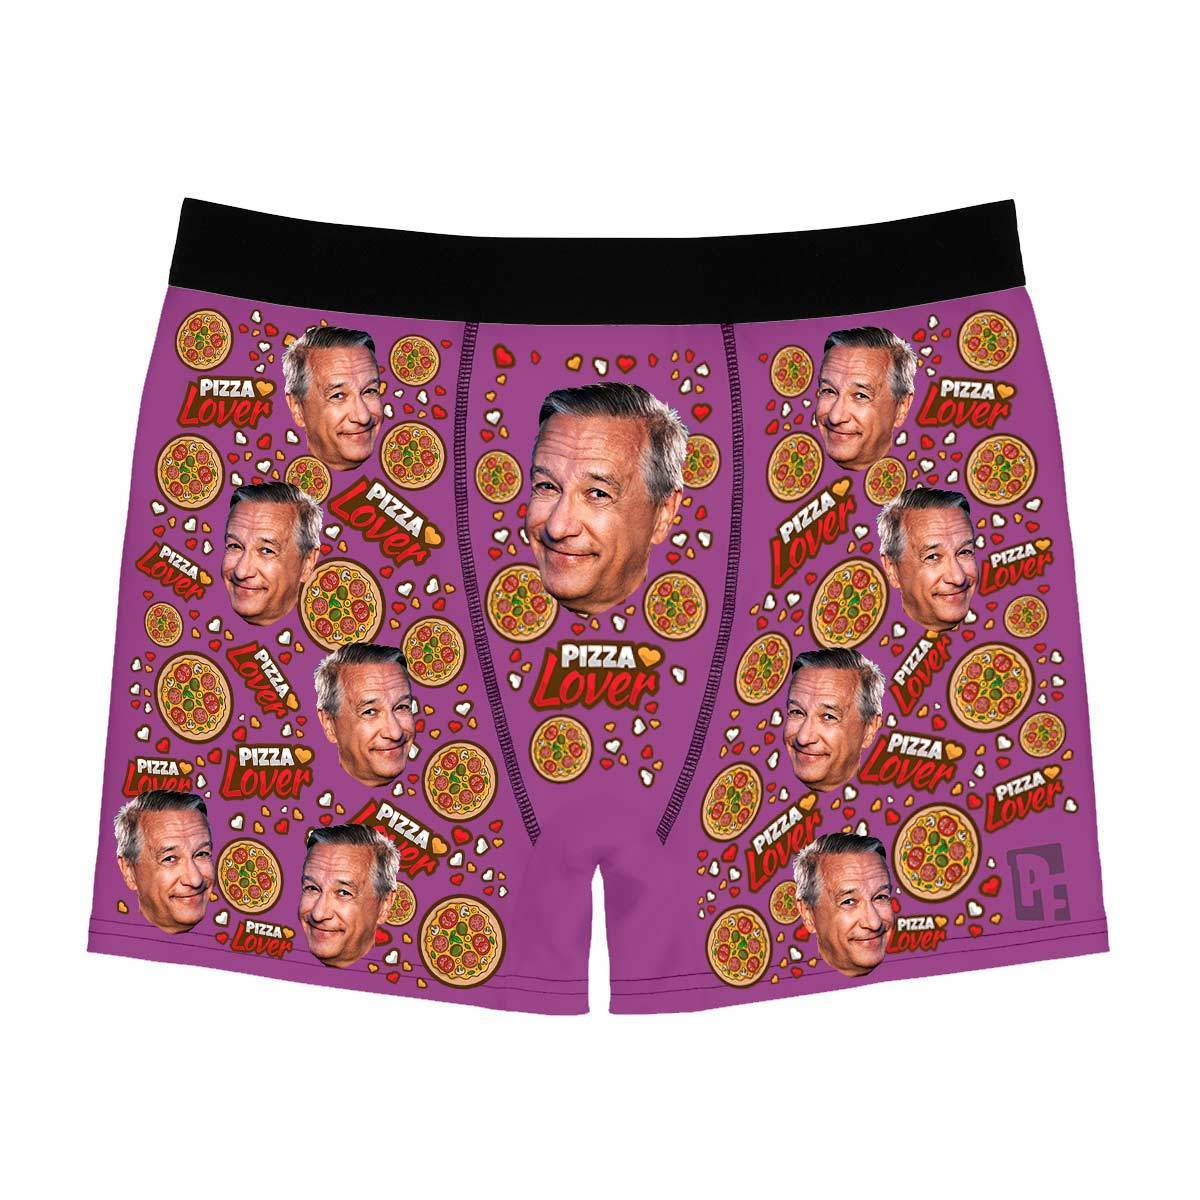 Purple Pizza Lover men's boxer briefs personalized with photo printed on them